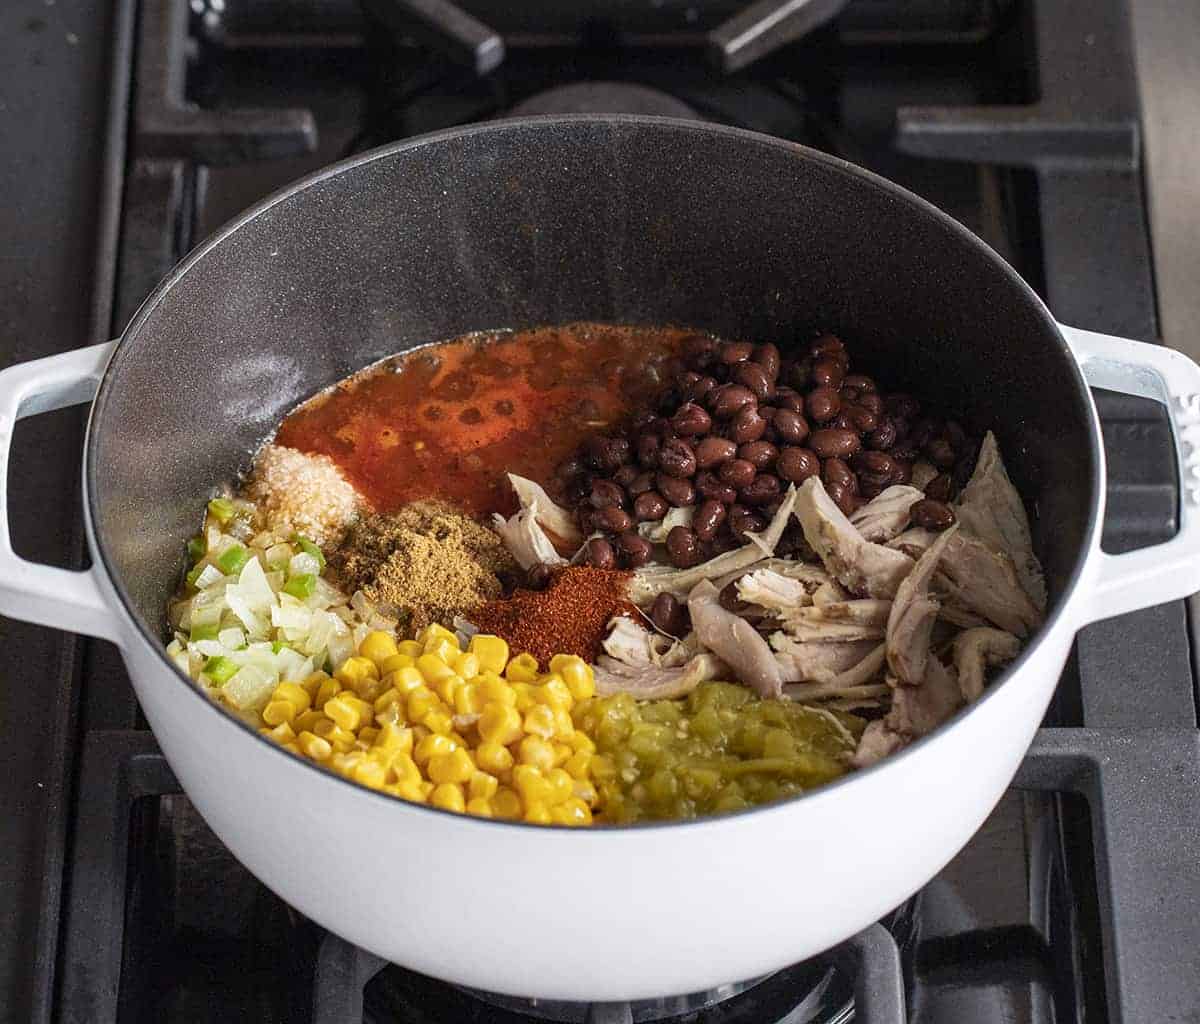 Ingredients for Chicken Tortilla Soup on Stove in a Pot